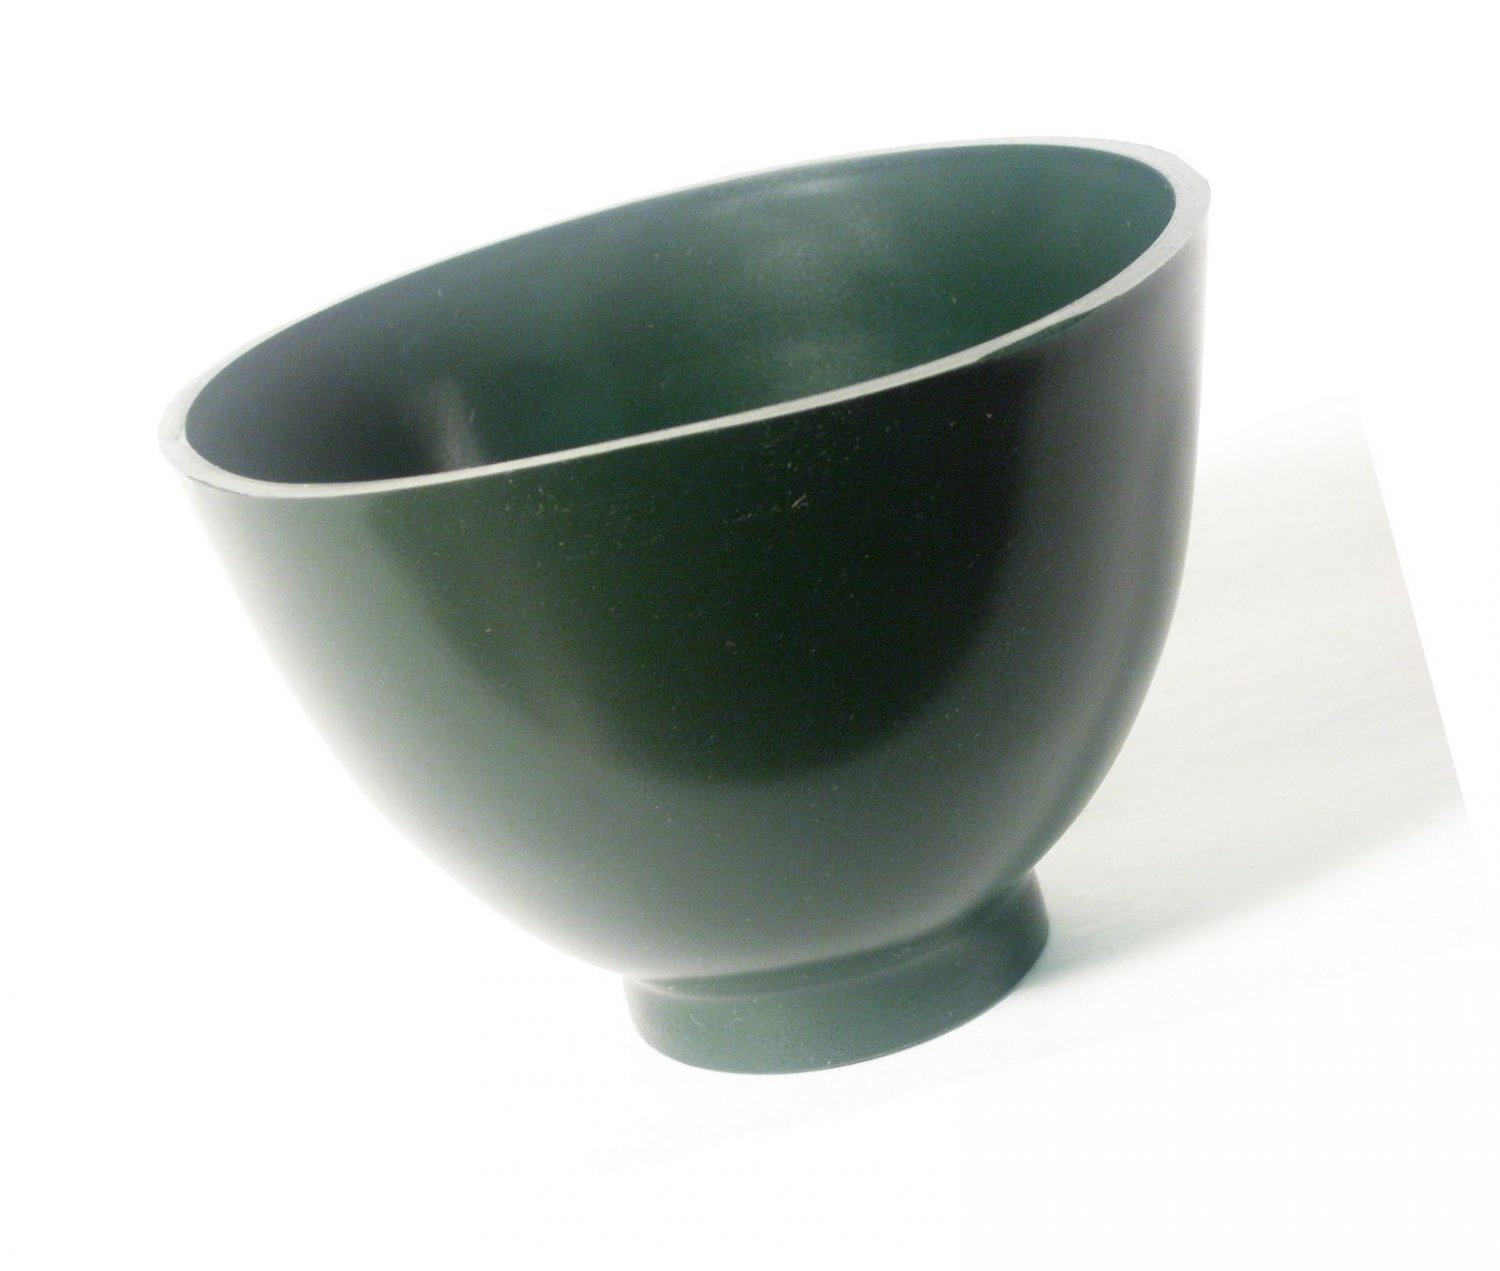 Besqual: MB-l: Flexible Rubber Mixing Bowls: Large: Green